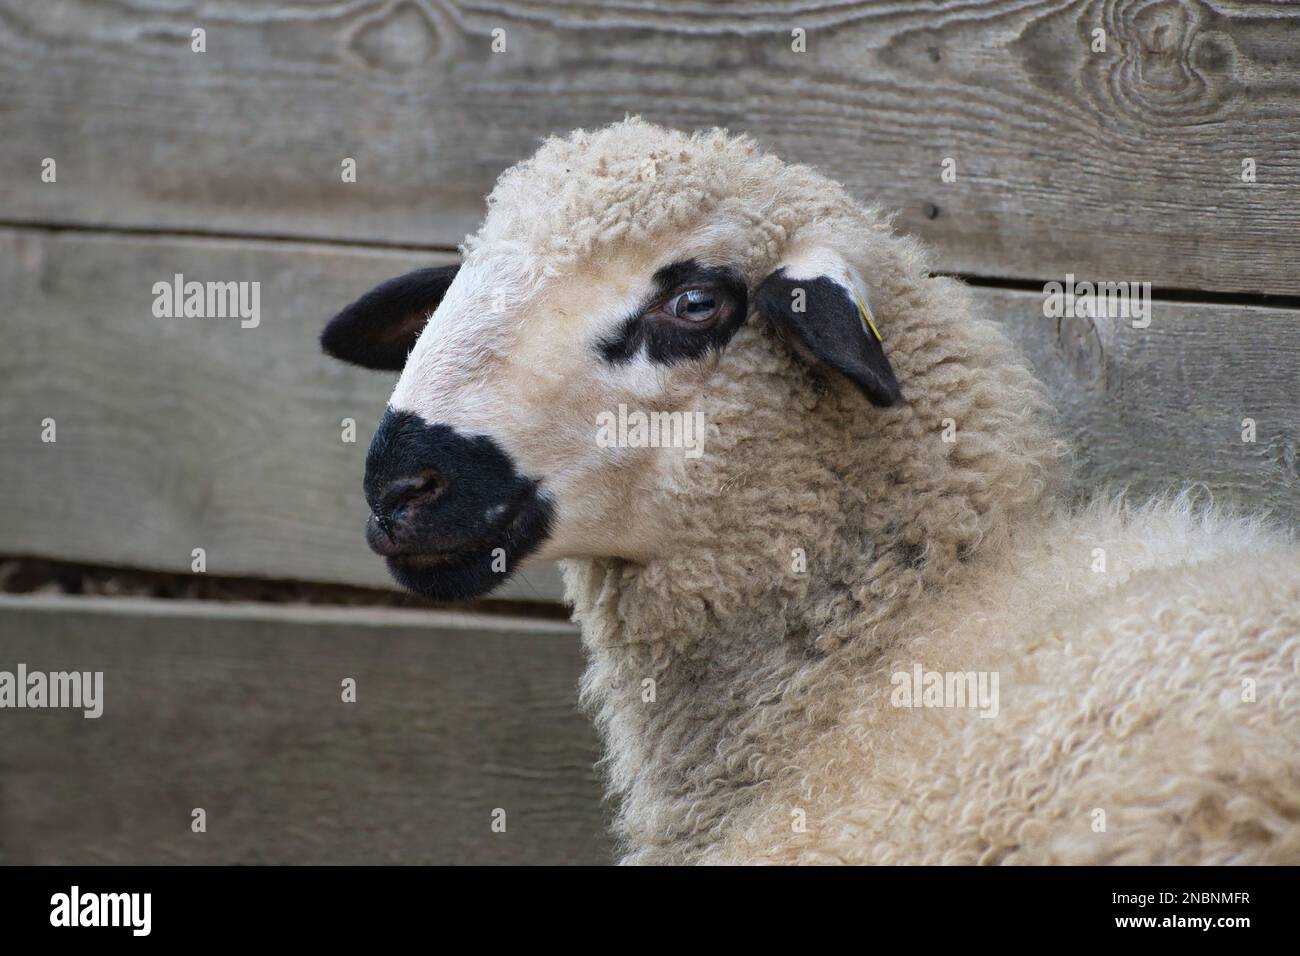 Portrait of a cute white sheep with black markings in front of the wooden stable. Stock Photo